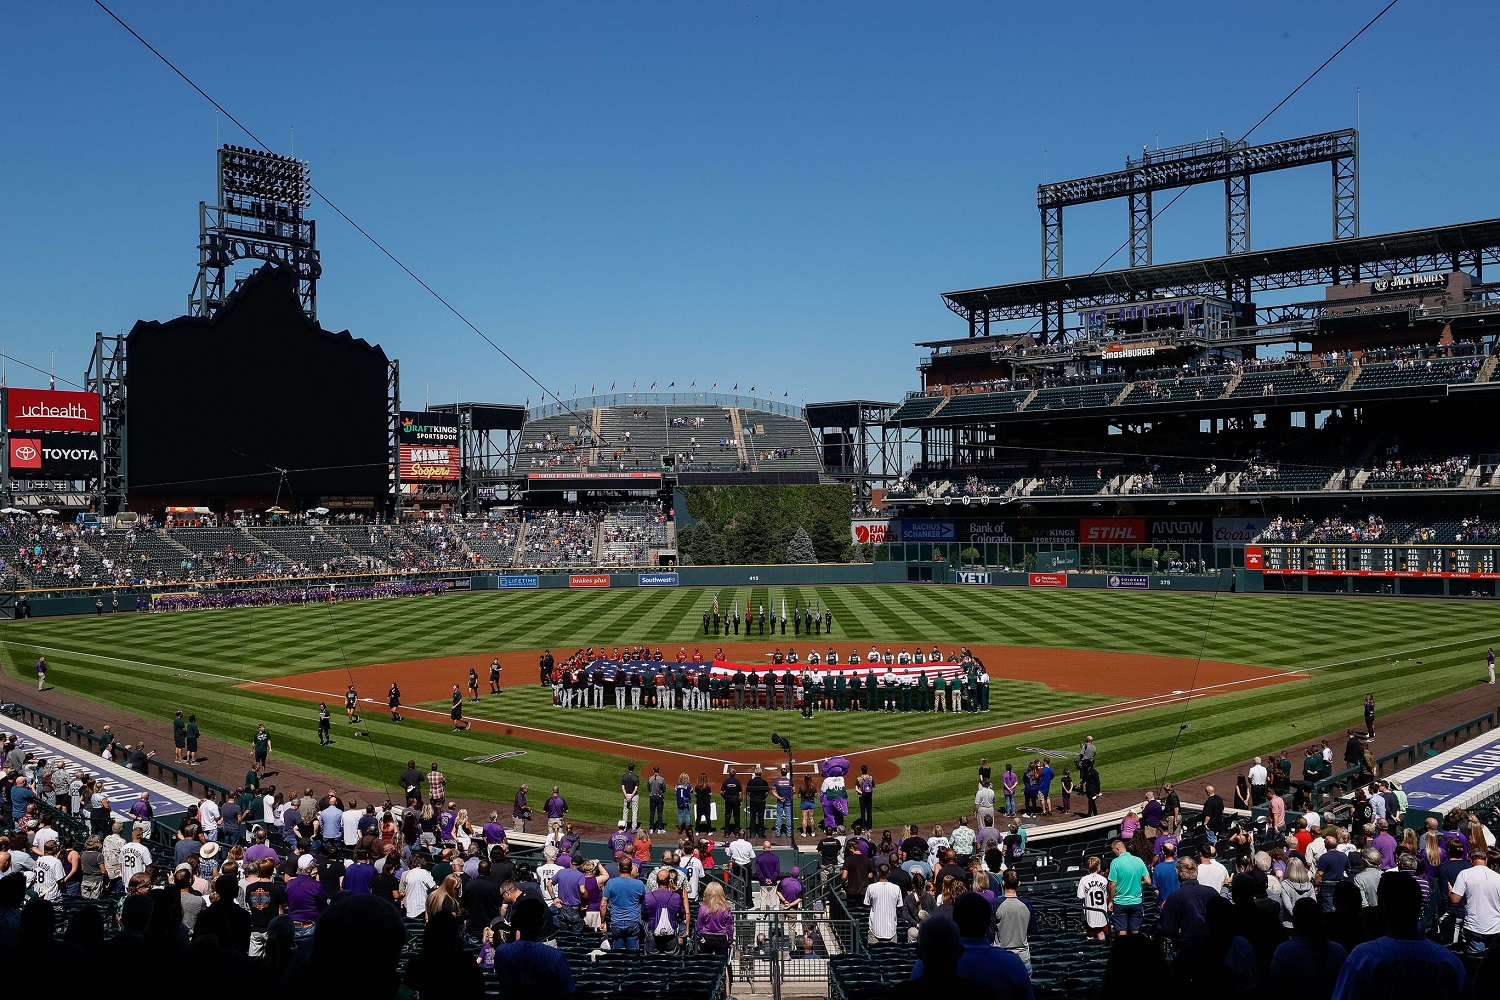 PHOTOS: Rockies opening day 2023 at Coors Field